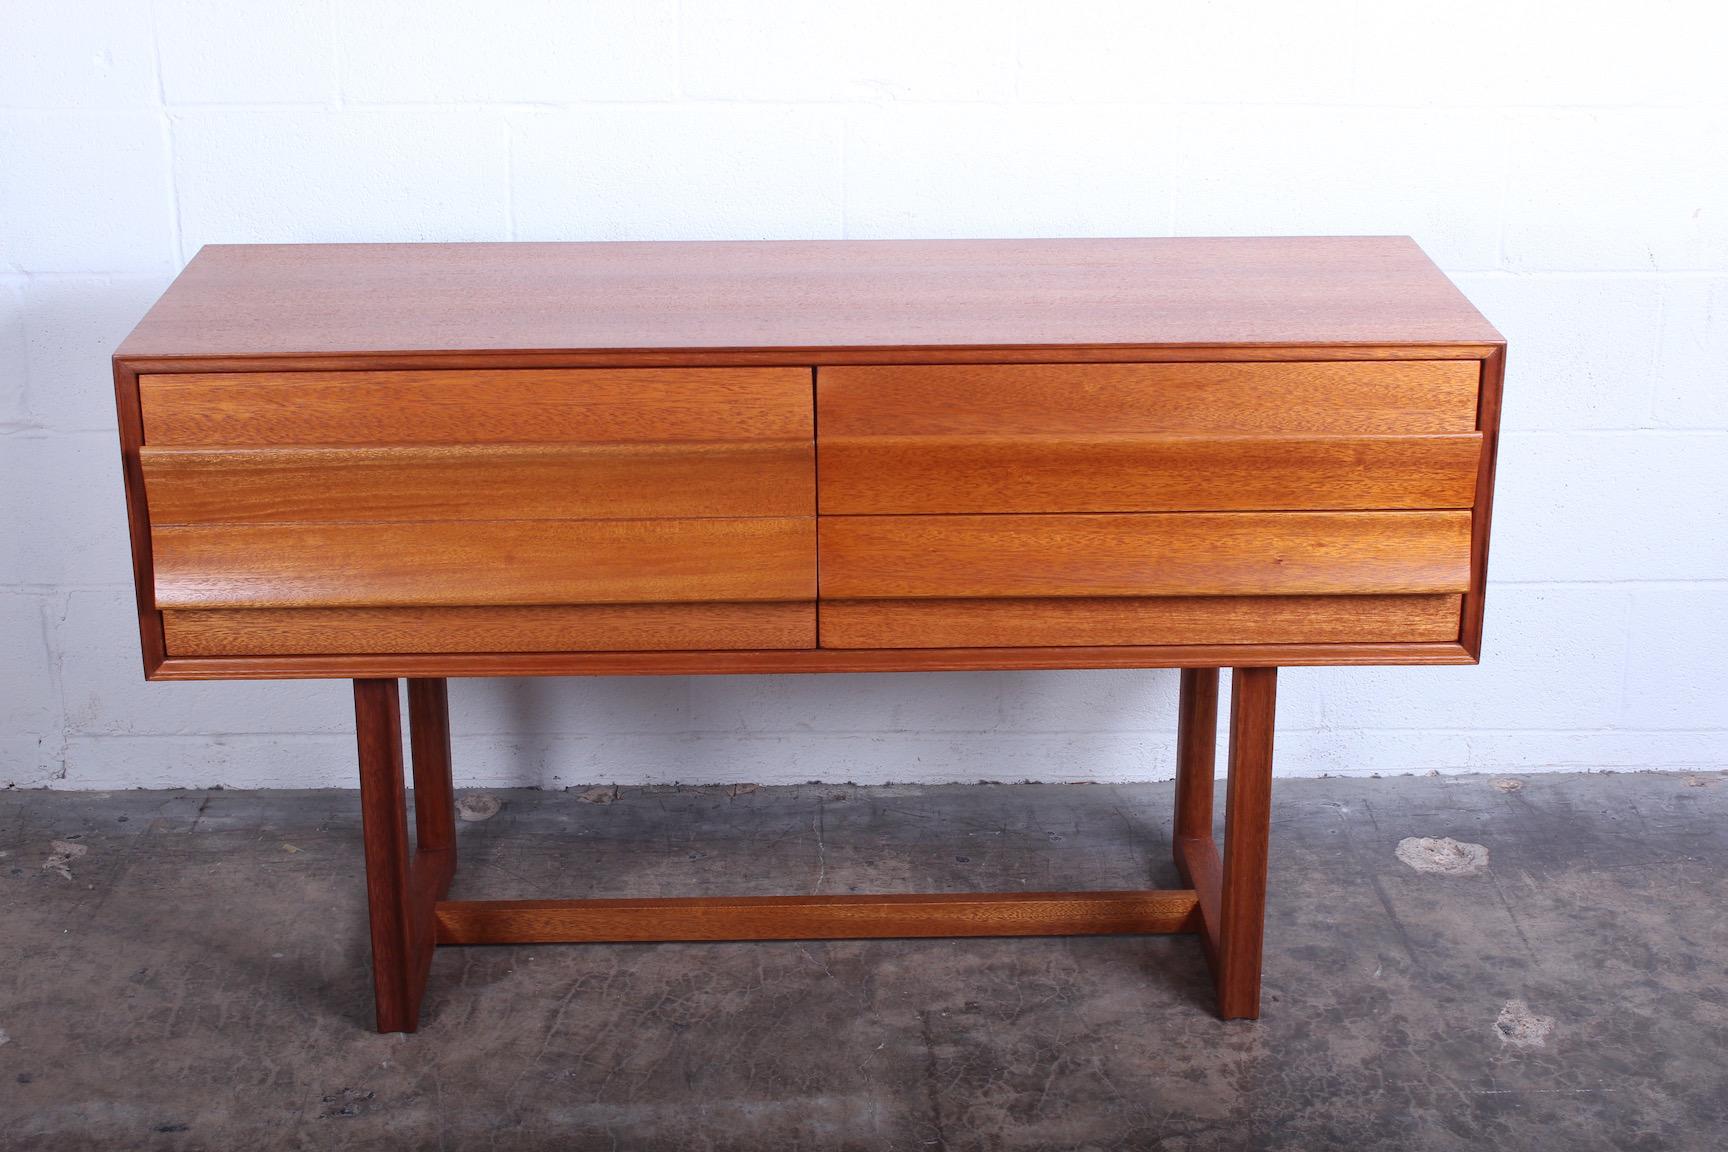 A bleached mahogany console table designed by Paul Laszlo for Brown Saltman.